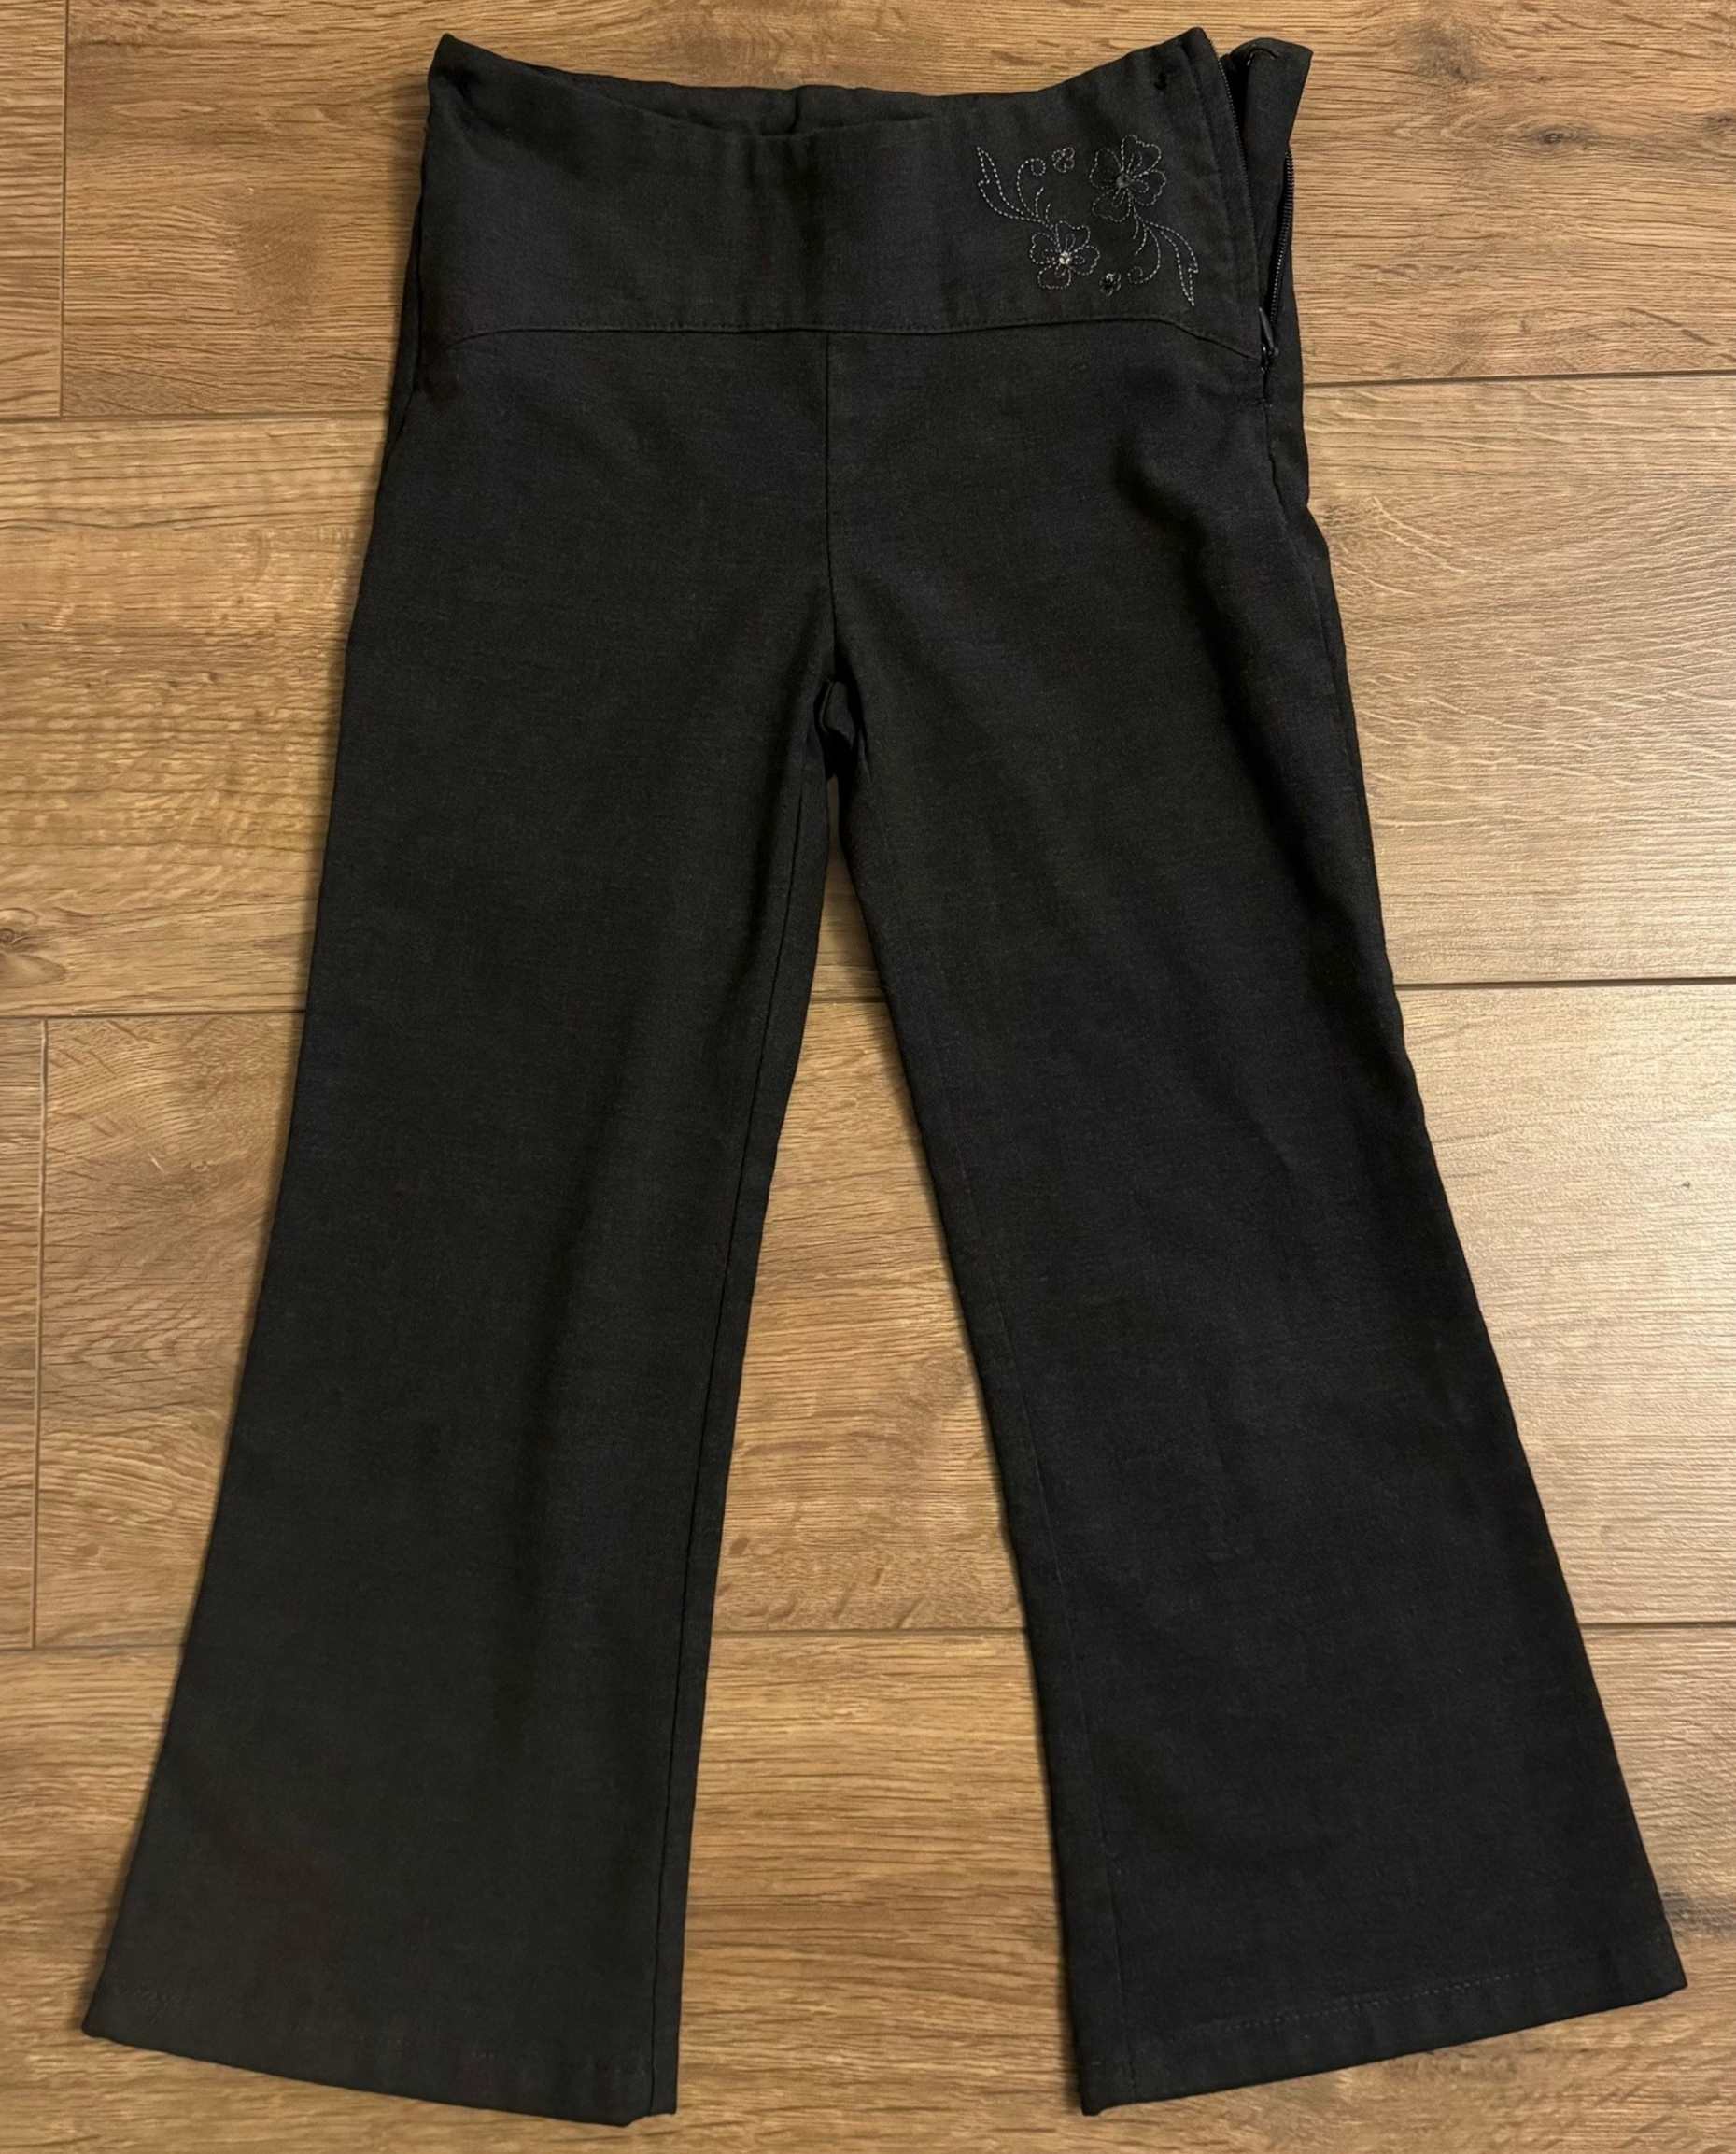 Trousers (with bows or charms) 4-5 yrs